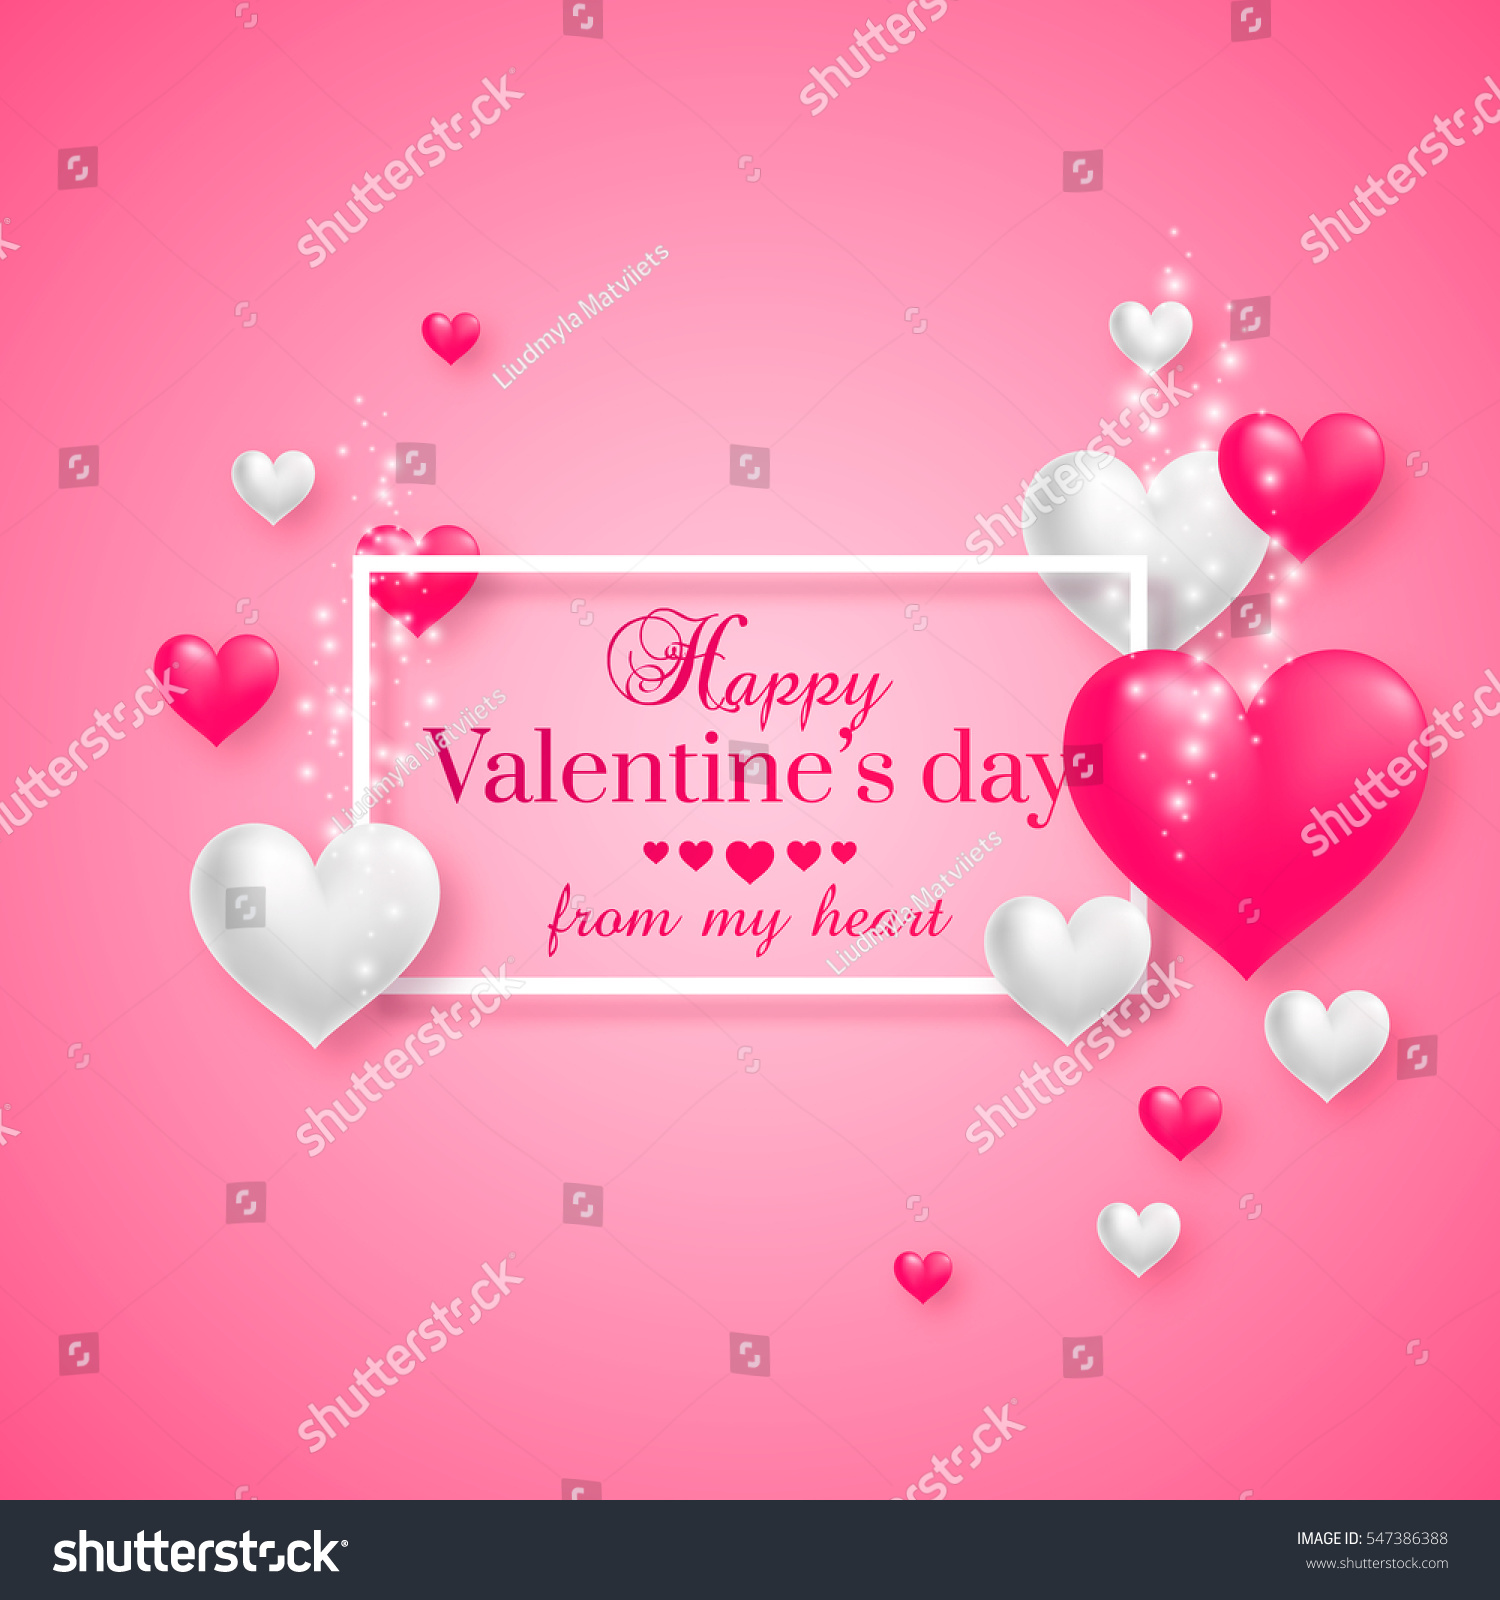 Realistic floating 3D Valentine hearts on pink background with happy Valentines day greetings. Vector Illustration. #547386388